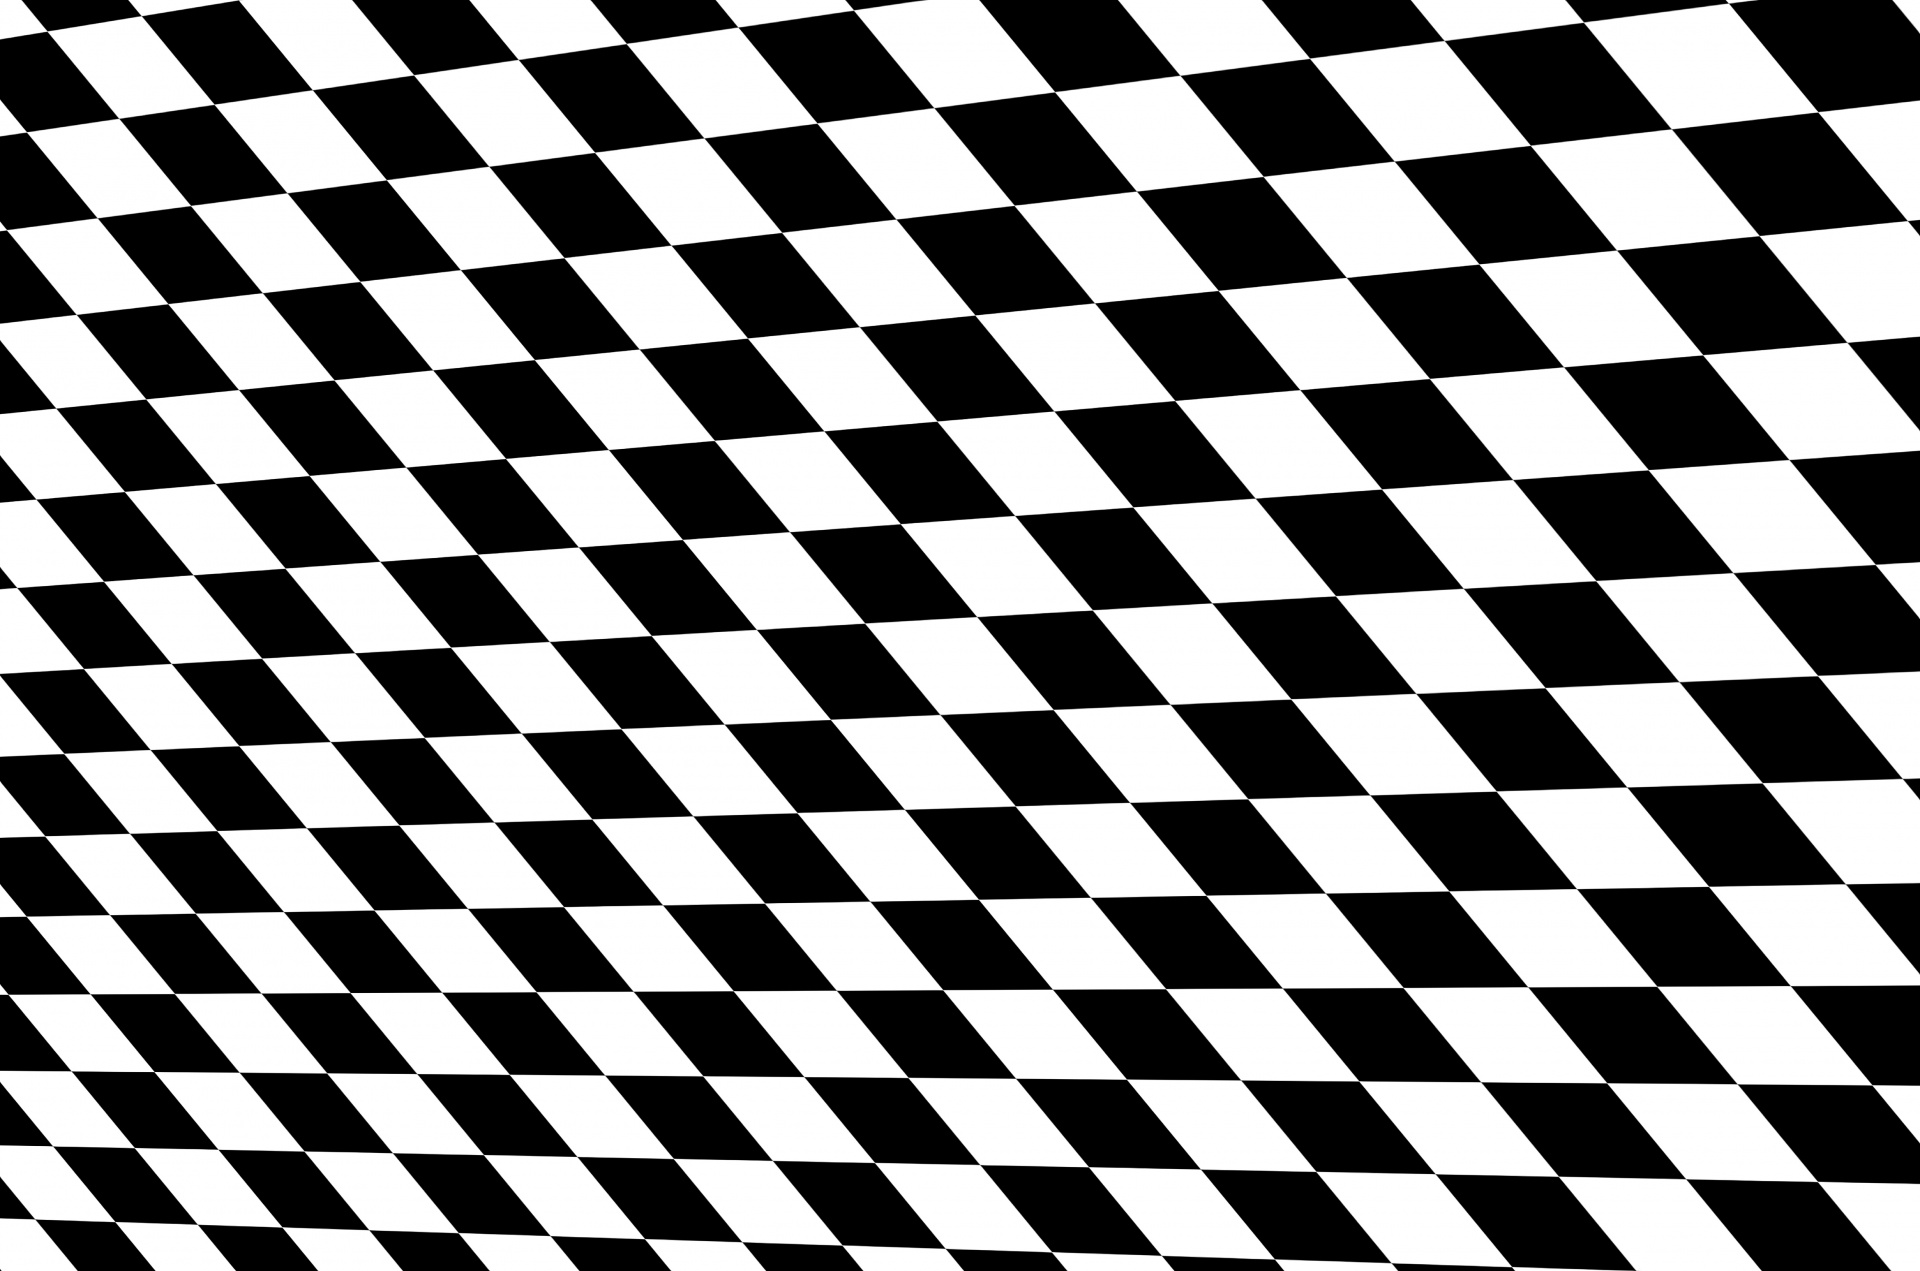 Squares Chessboard